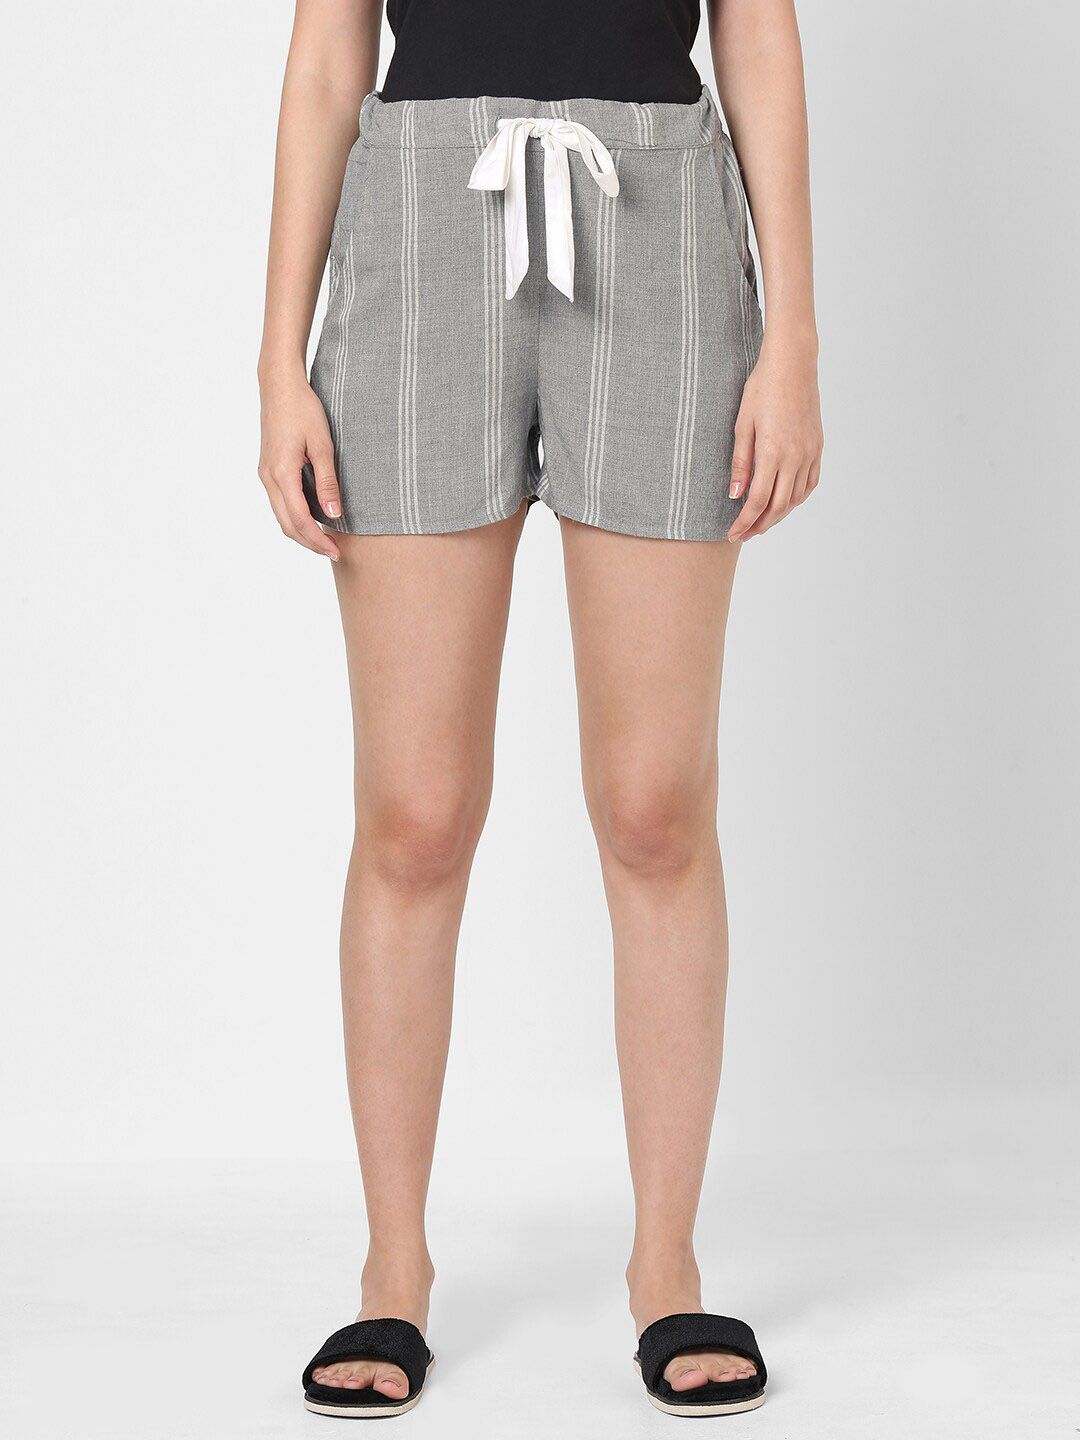 Mystere Paris Women Grey & White Striped Lounge Shorts Price in India